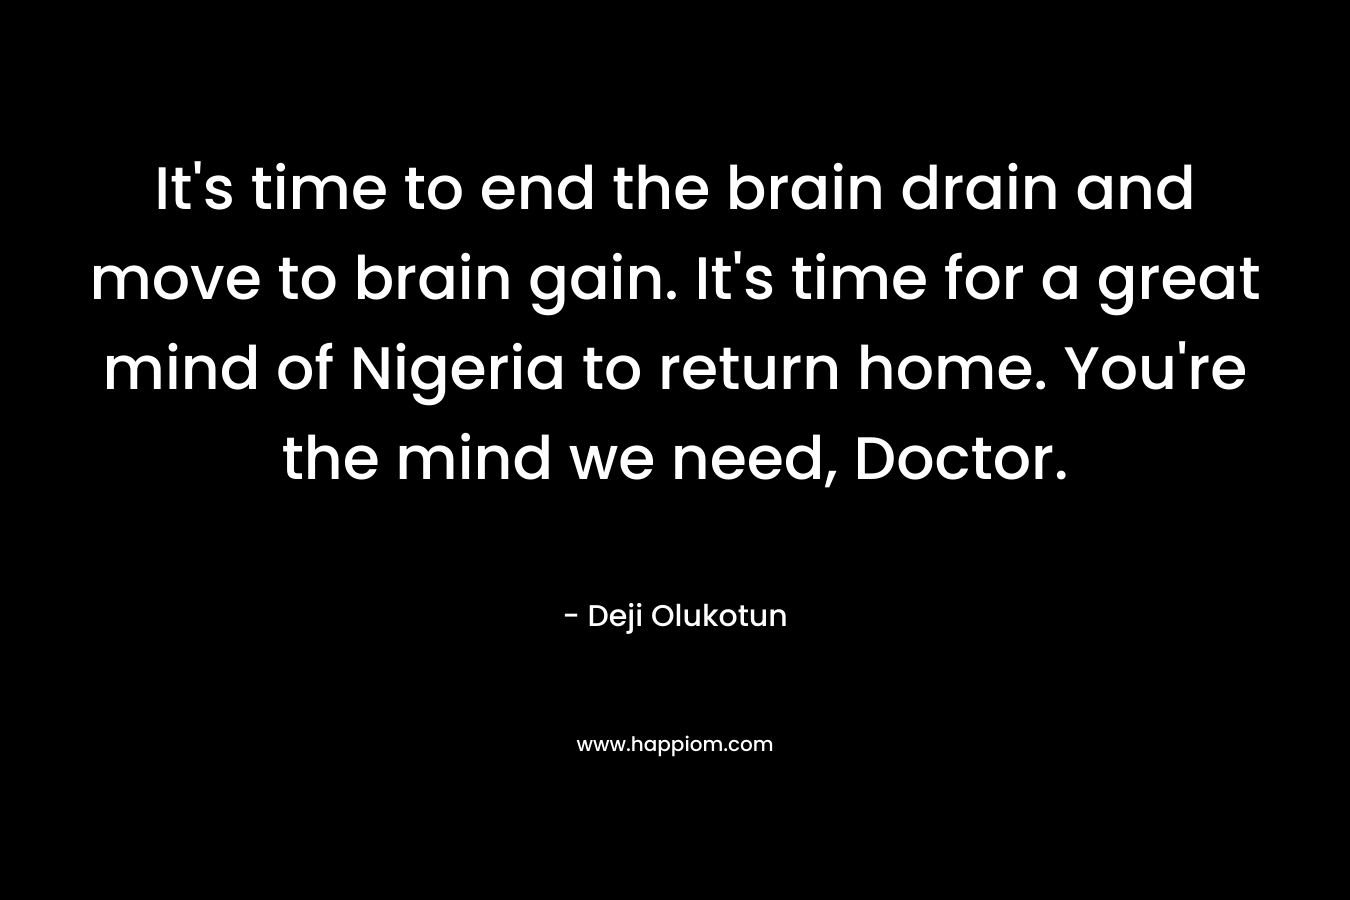 It's time to end the brain drain and move to brain gain. It's time for a great mind of Nigeria to return home. You're the mind we need, Doctor.